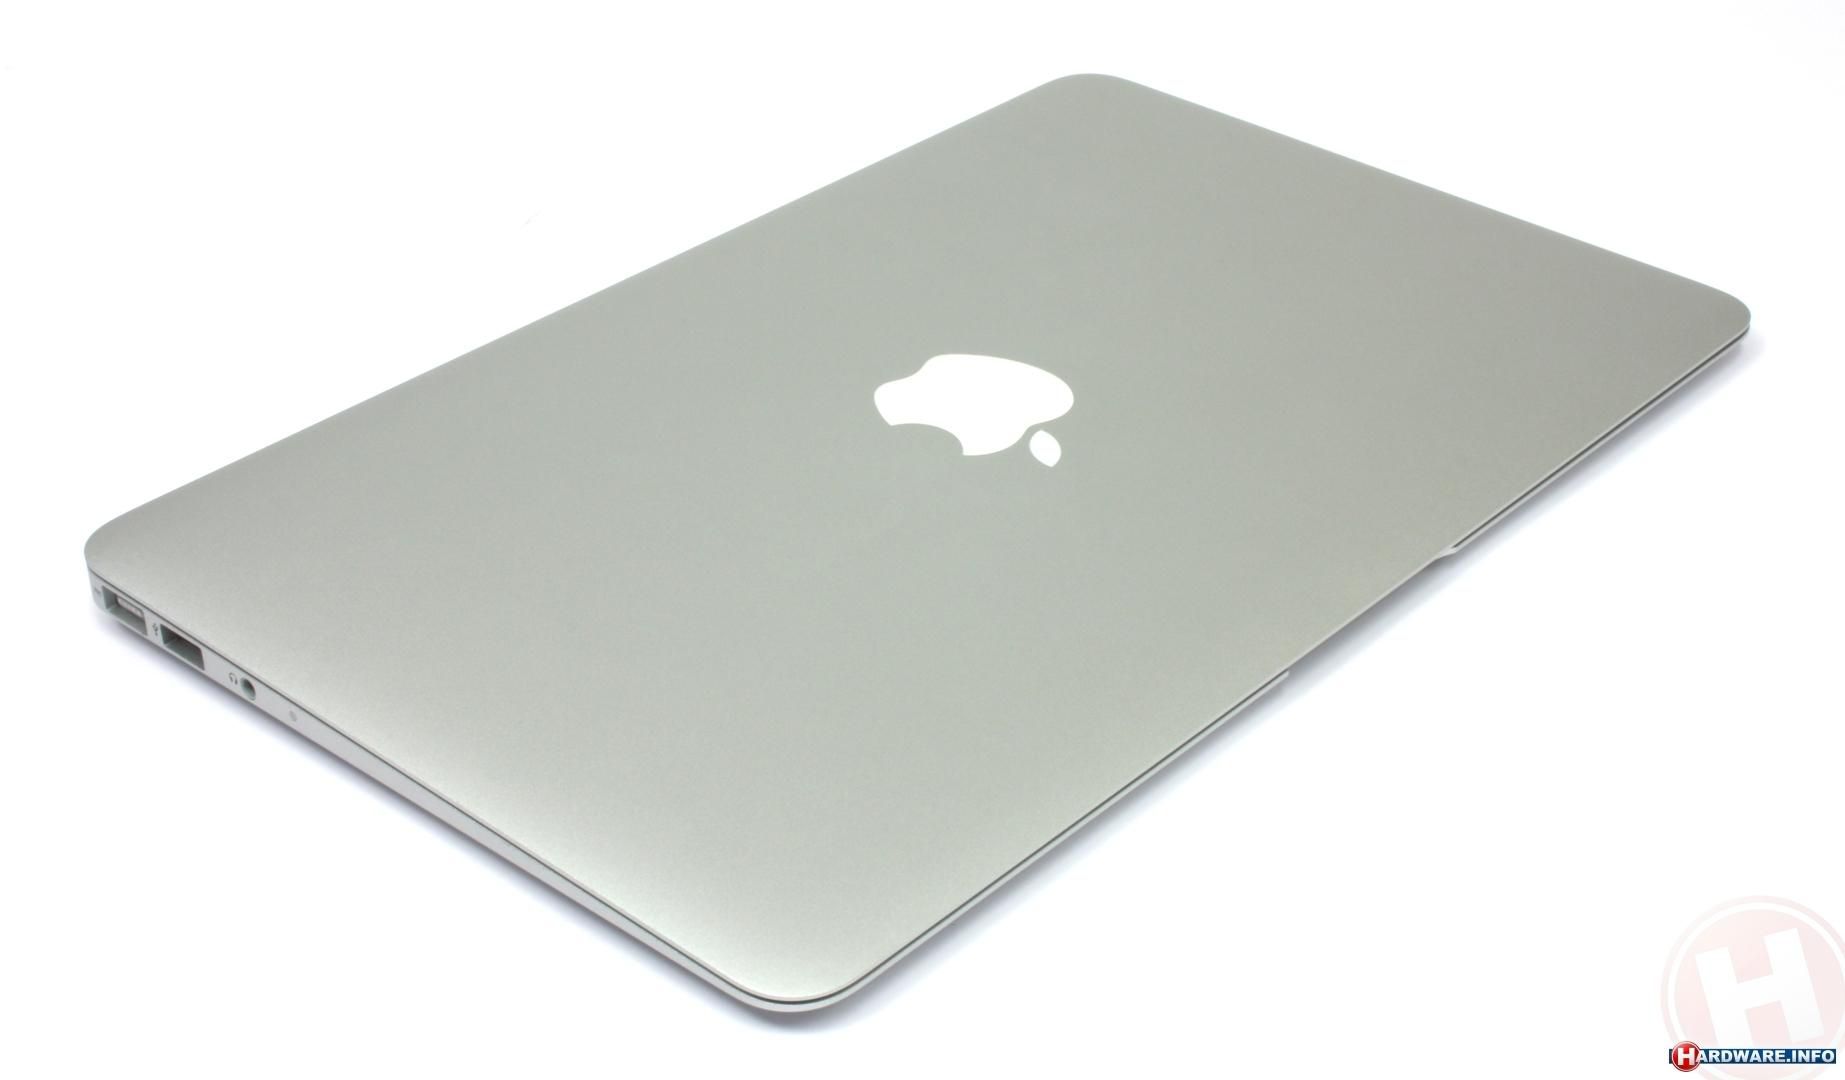 Apple macbook air a1370 price gold necklaces with small pendants